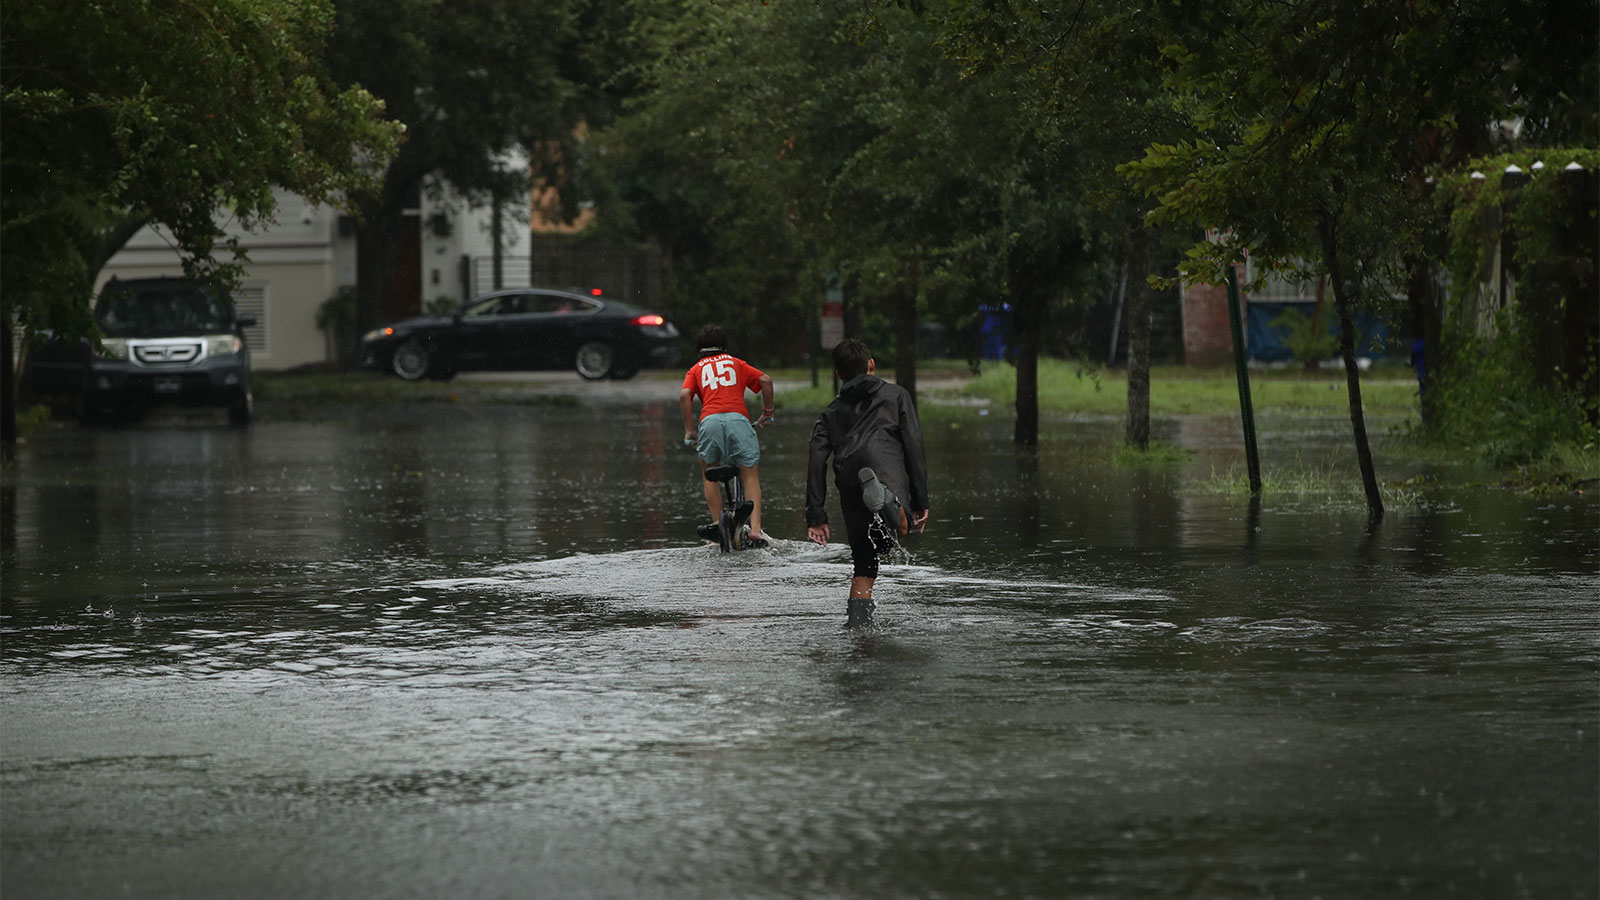 Two youths on a flooded street; one on a bike and one skateboarding; houses and trees in the distance